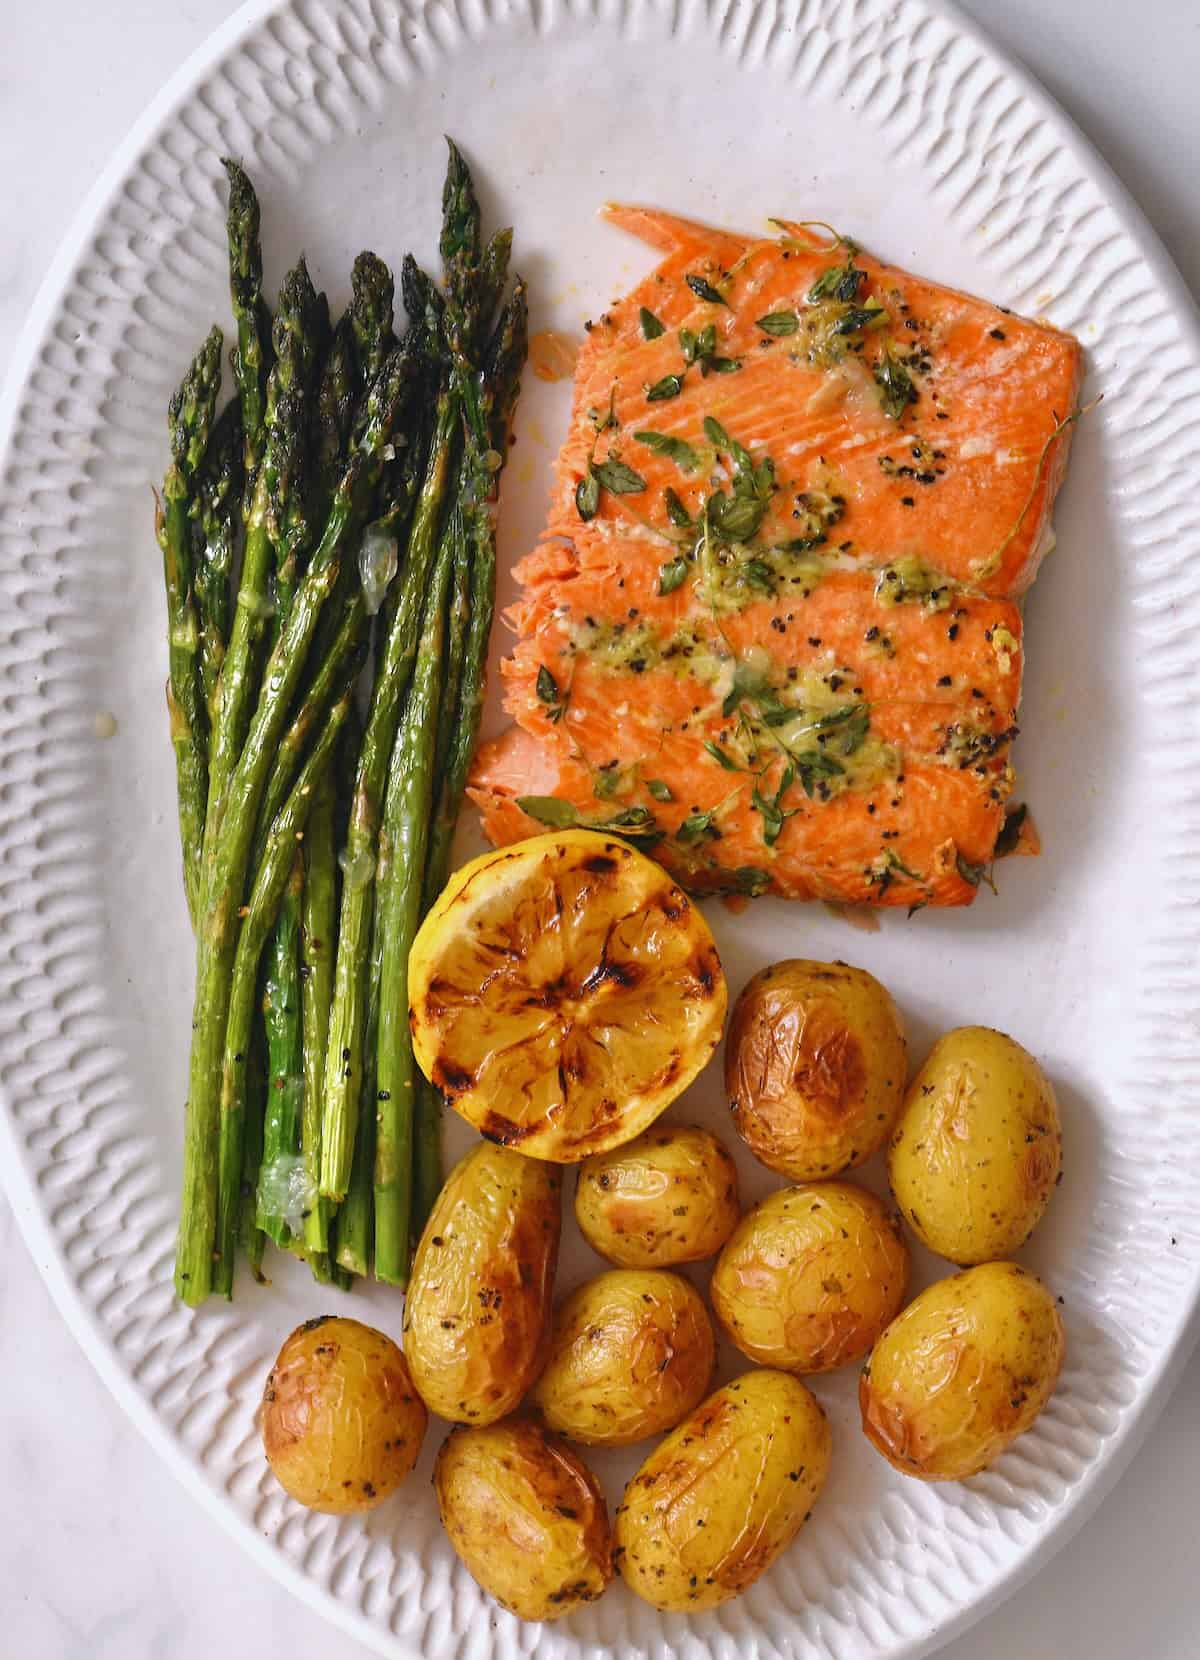 A serving of asparagus, salmon, and potatoes